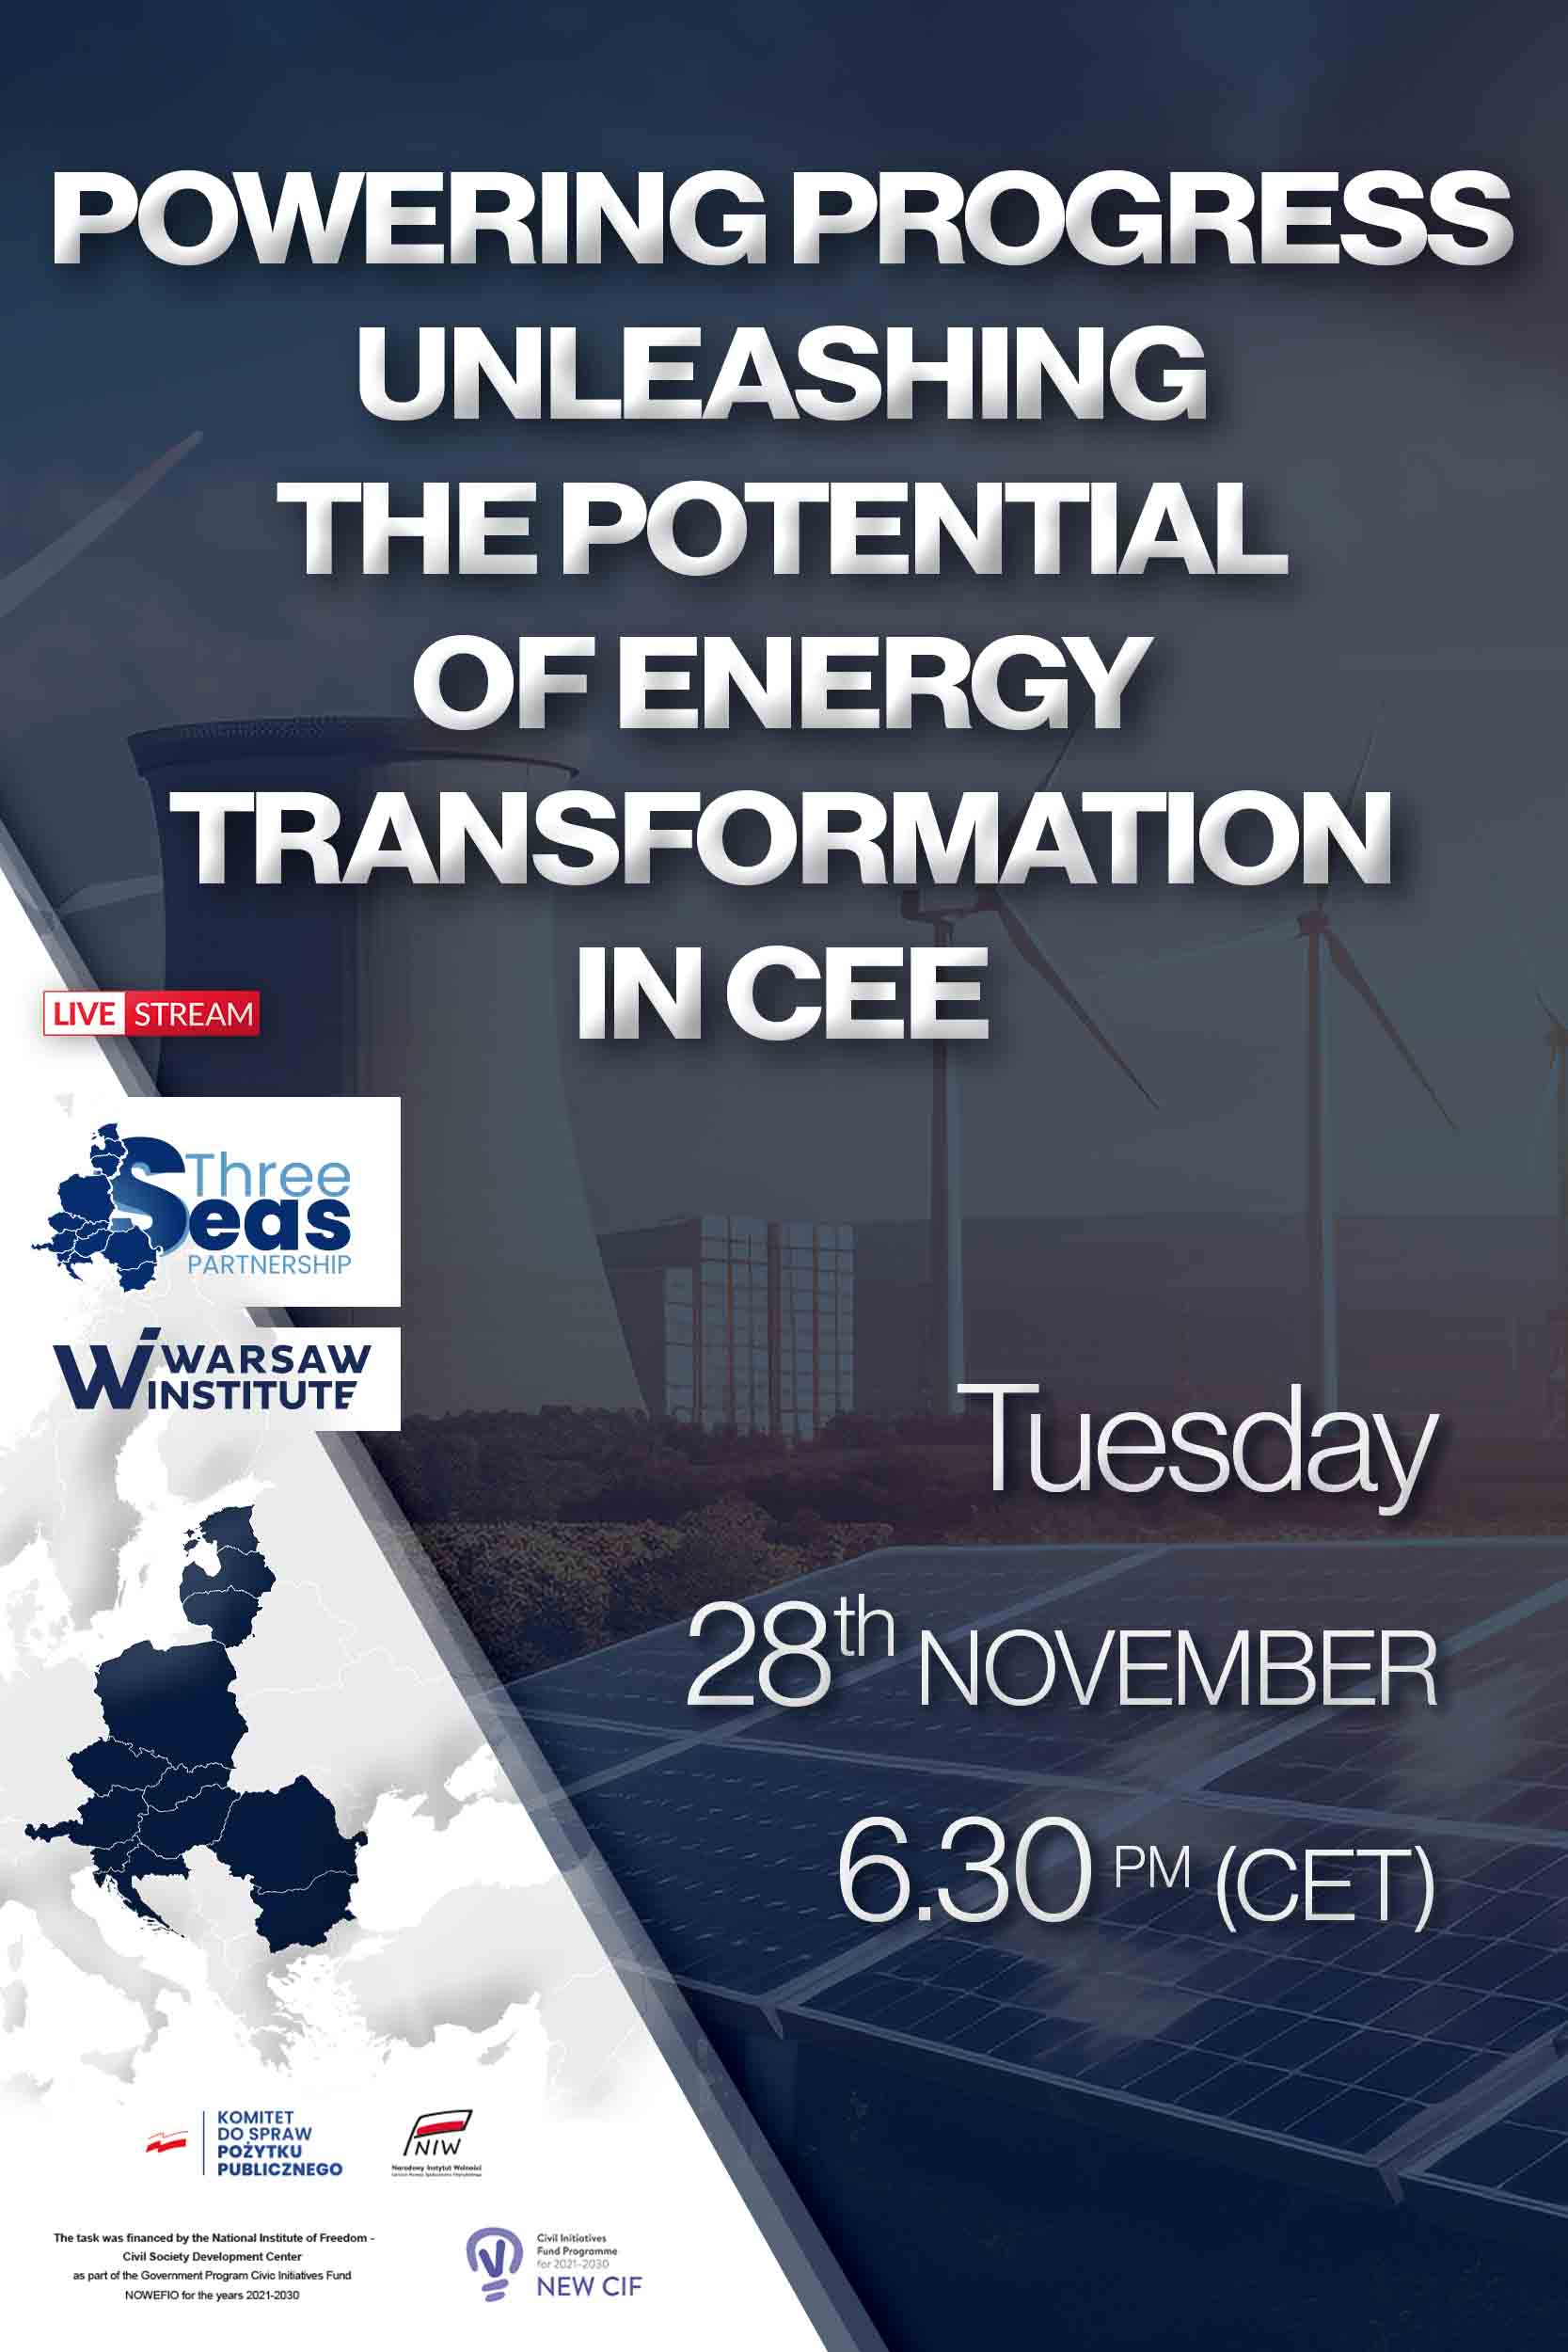 Powering progress unleashing the potential of energy transformation in CEE